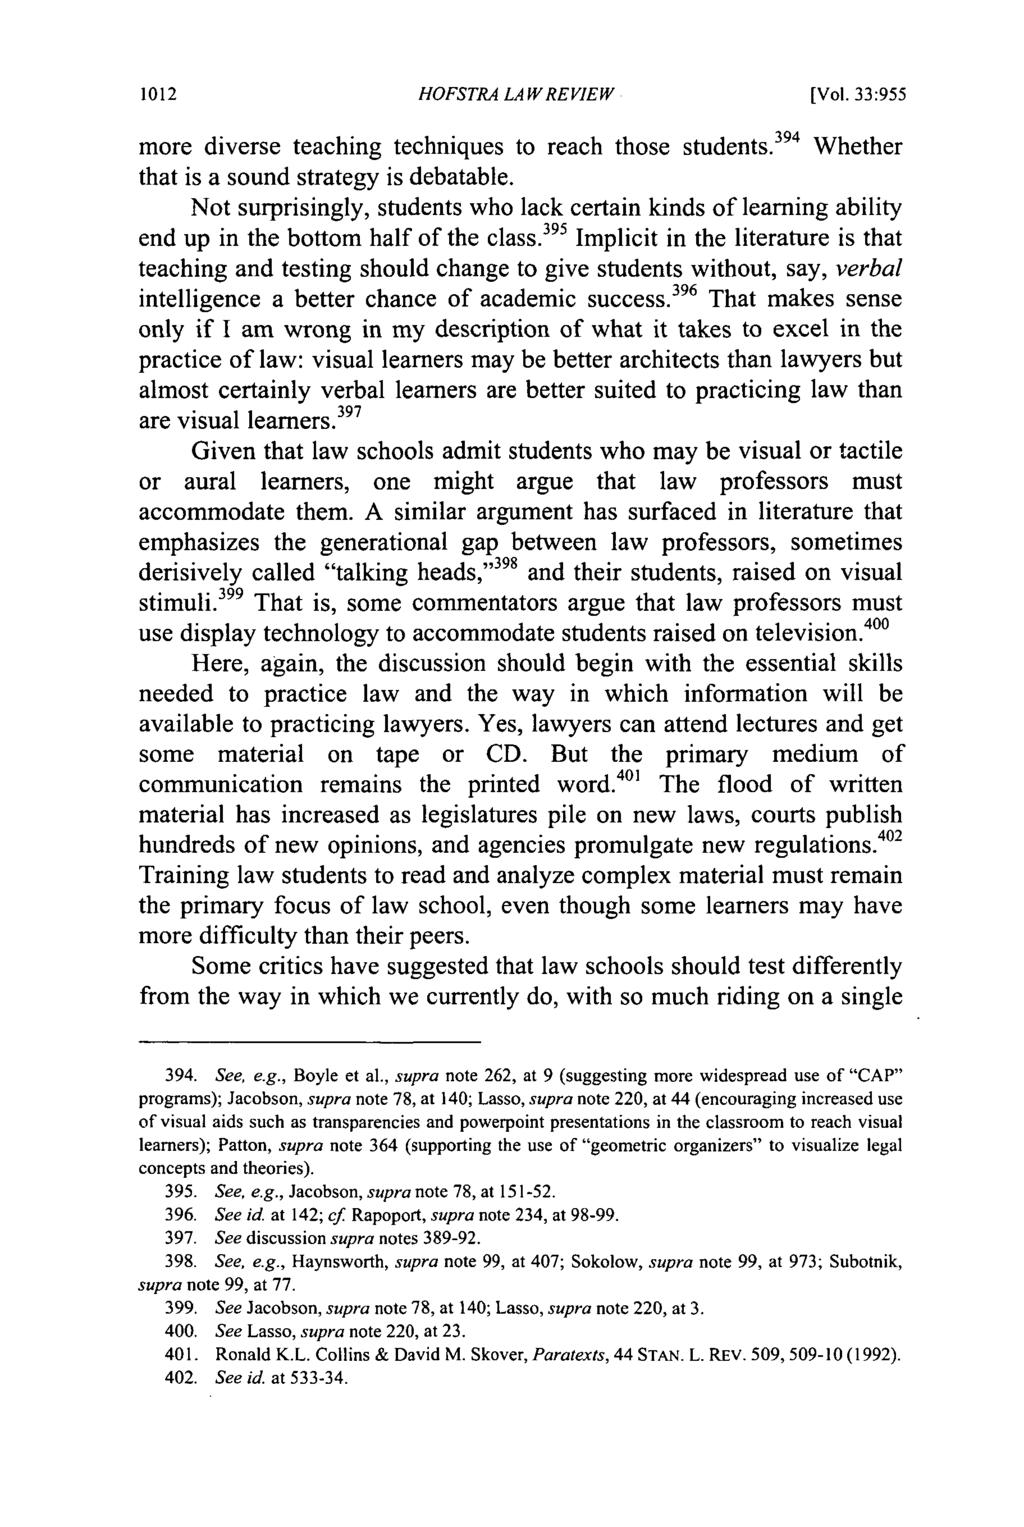 Hofstra Law Review, Vol. 33, Iss. 3 [2005], Art. 4 HOFSTRA LAW REVIEW [Vol. 33:955 more diverse teaching techniques to reach those students. 39 4 Whether that is a sound strategy is debatable.